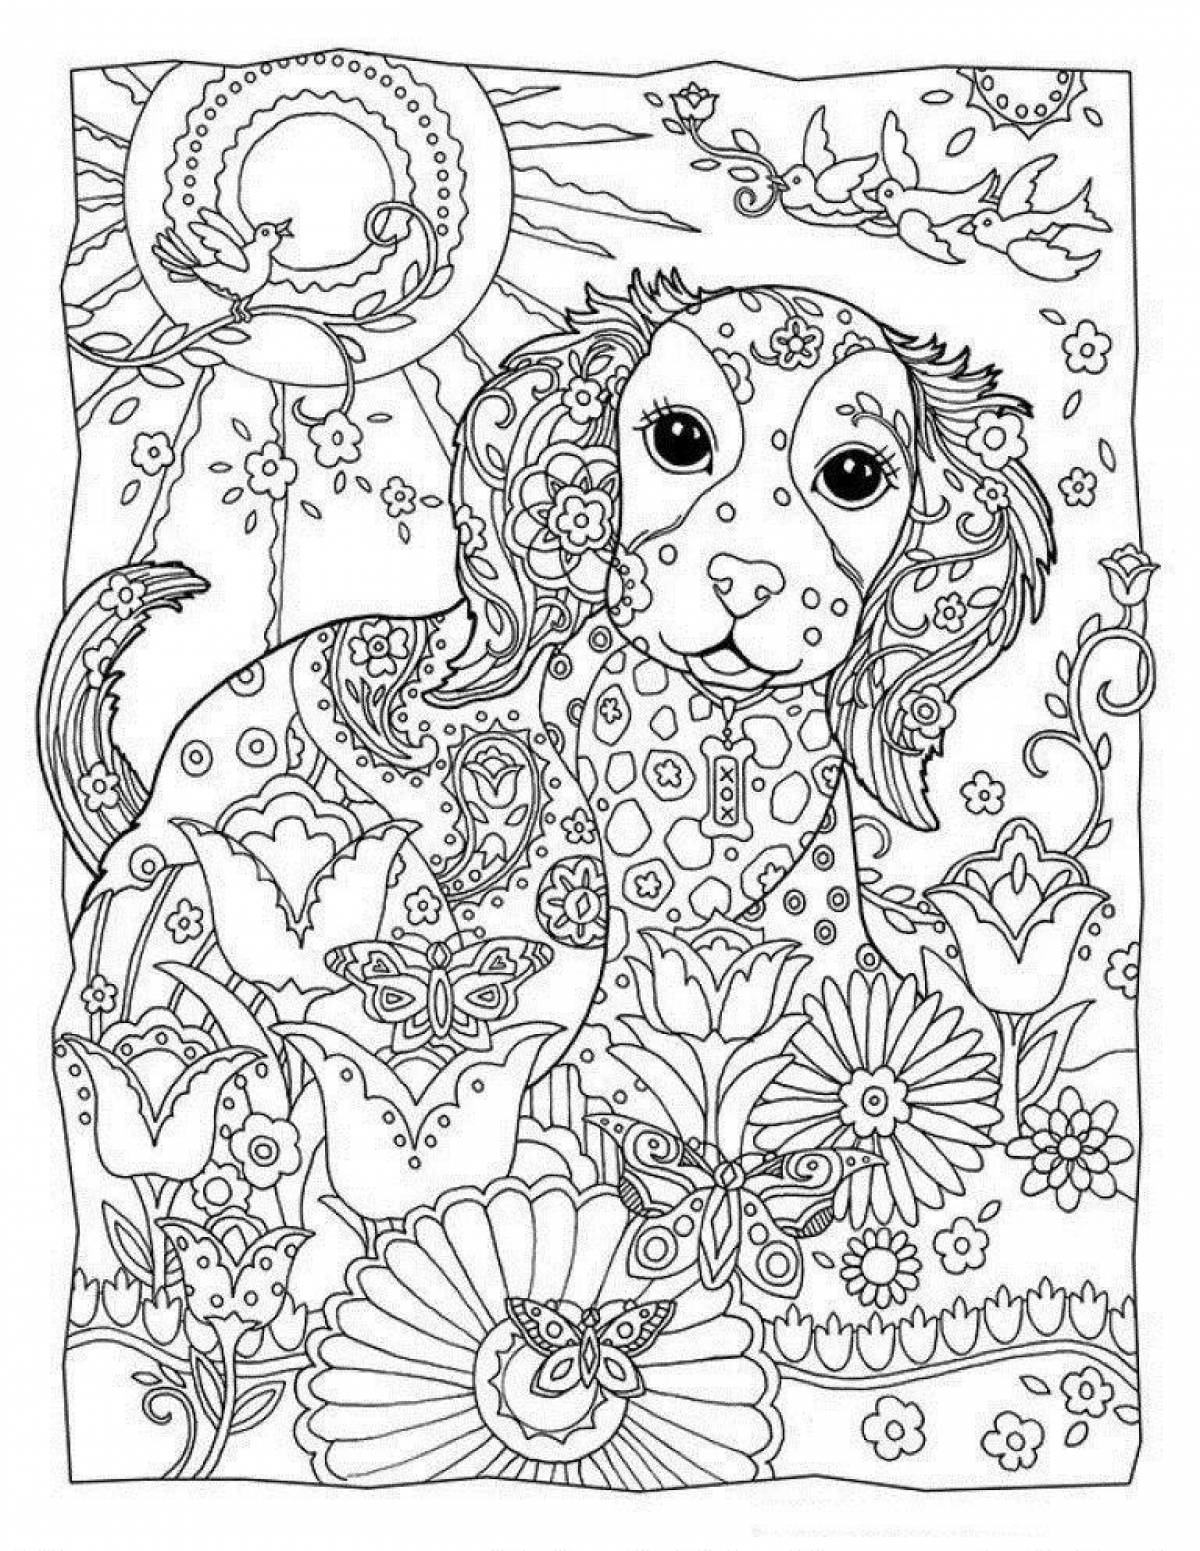 Luminous coloring book for girls 9 years old